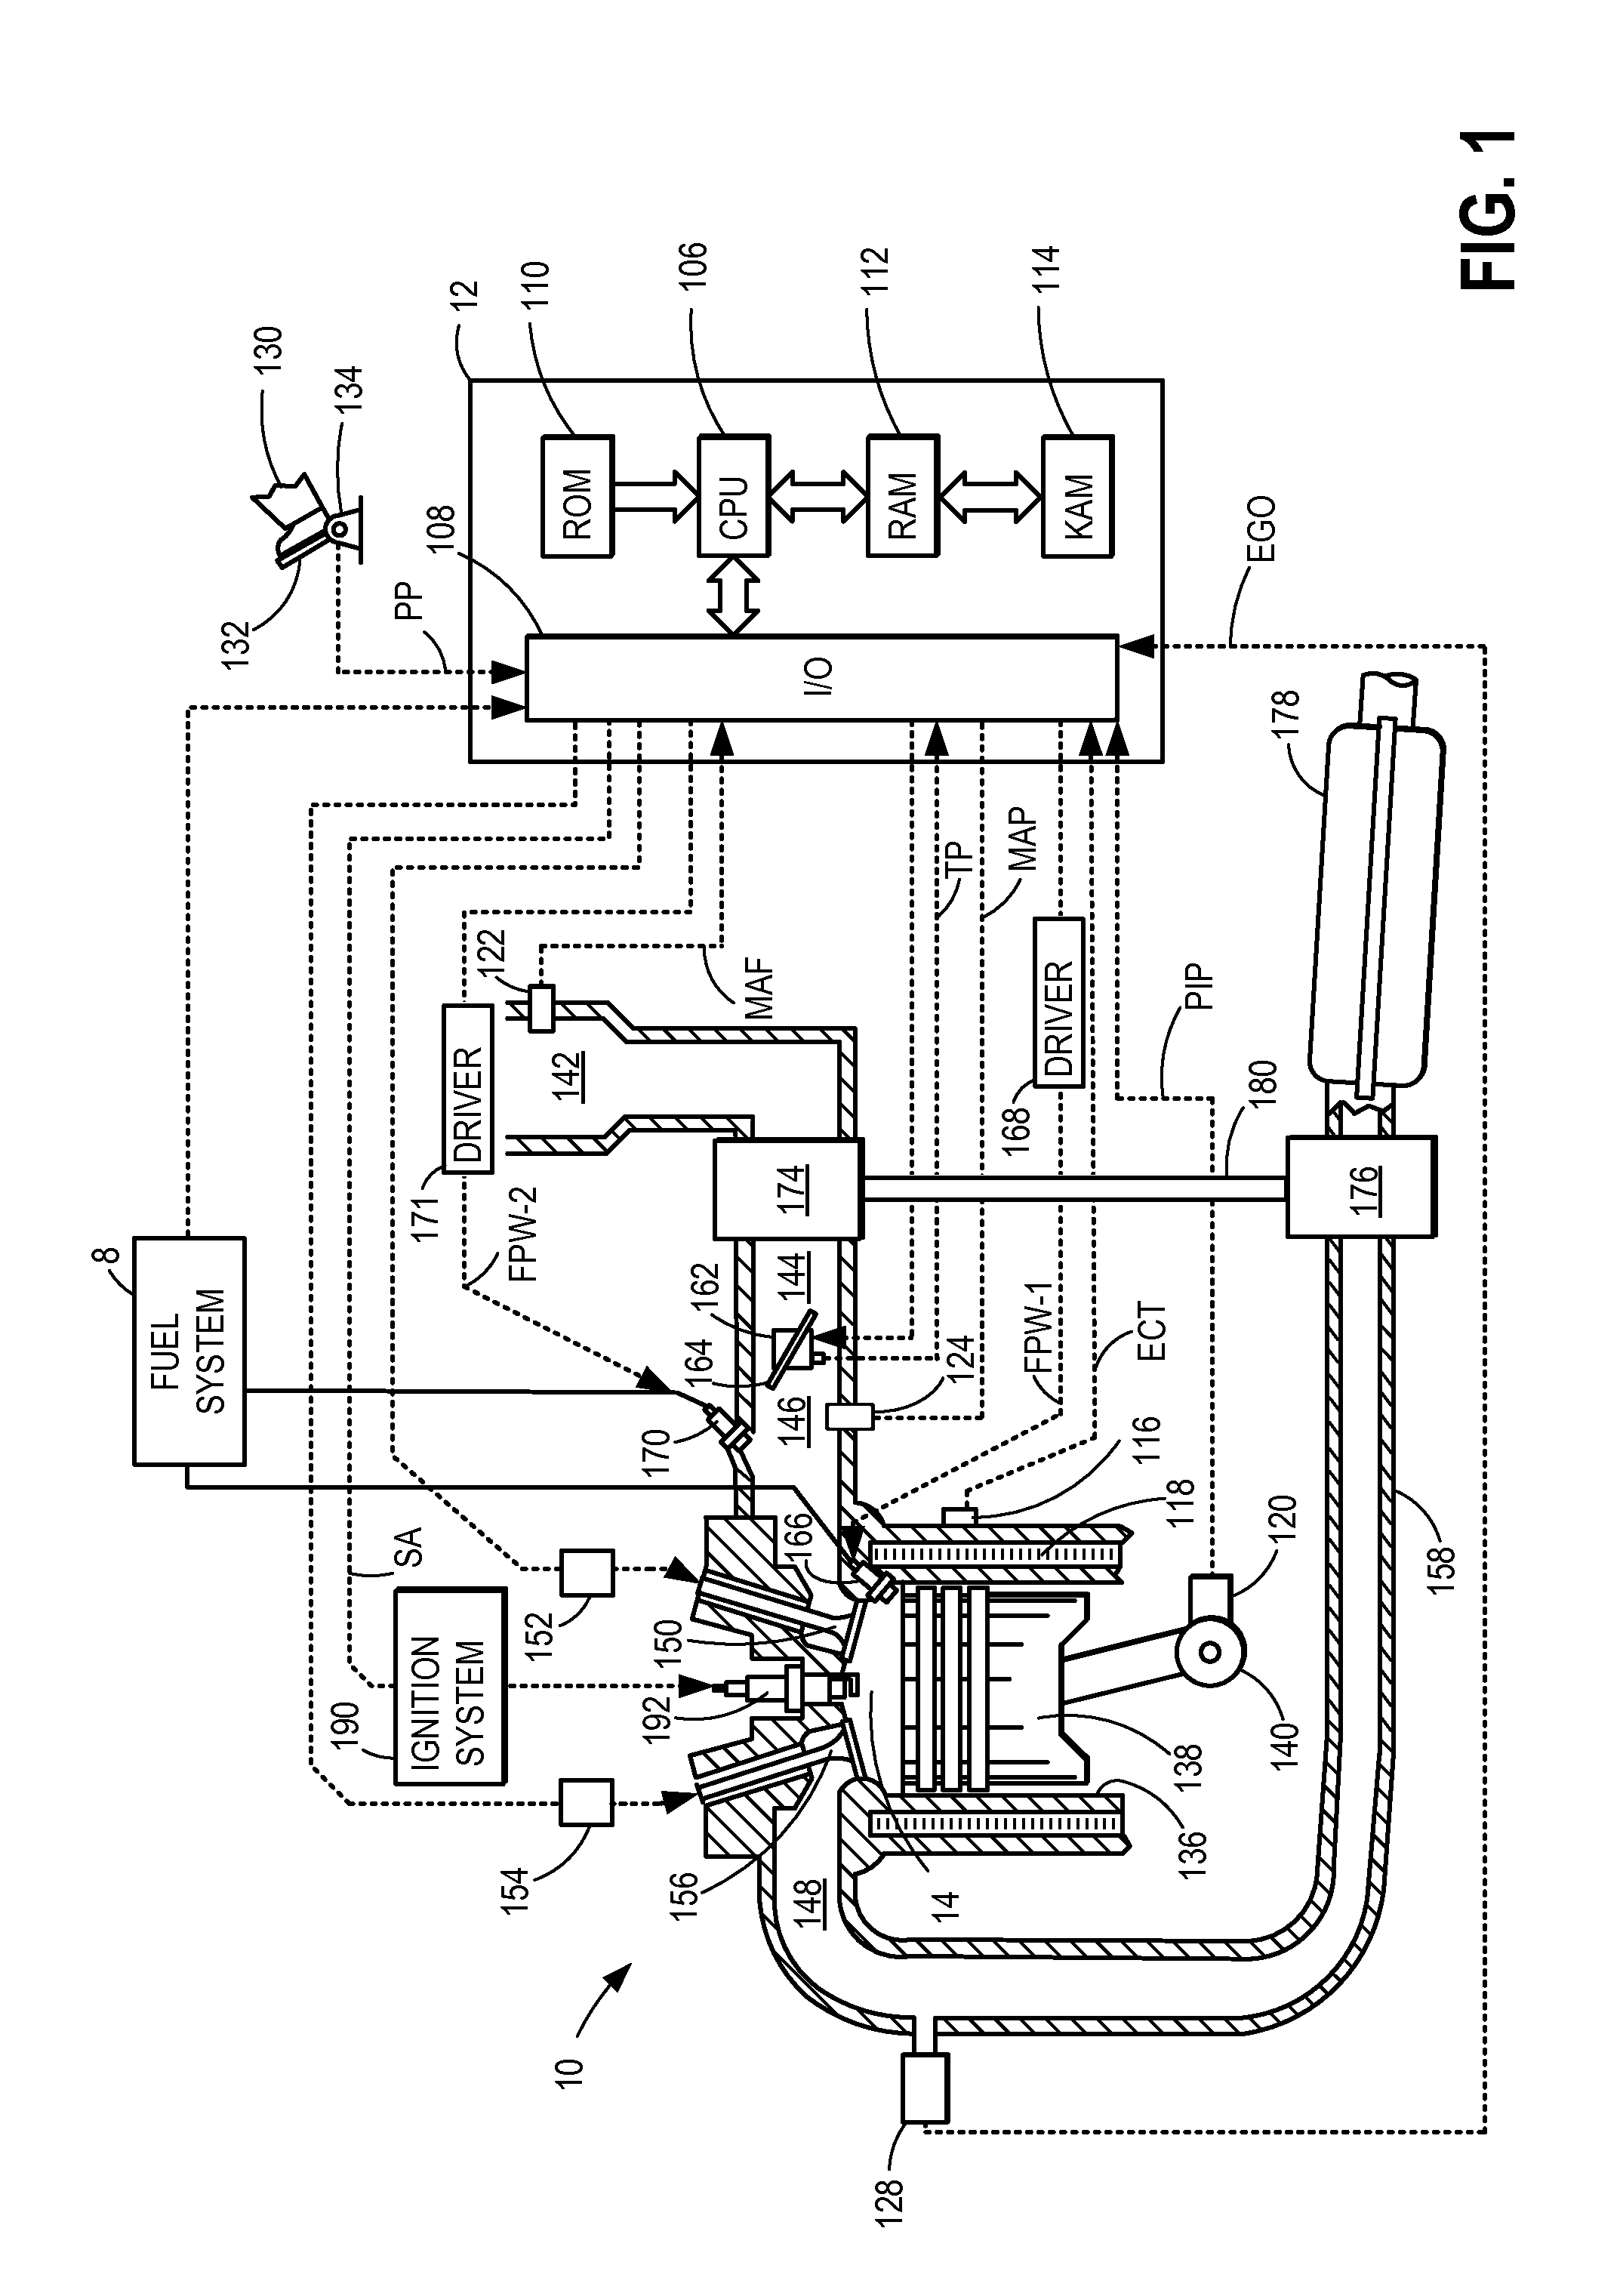 Direct injection fuel pump system